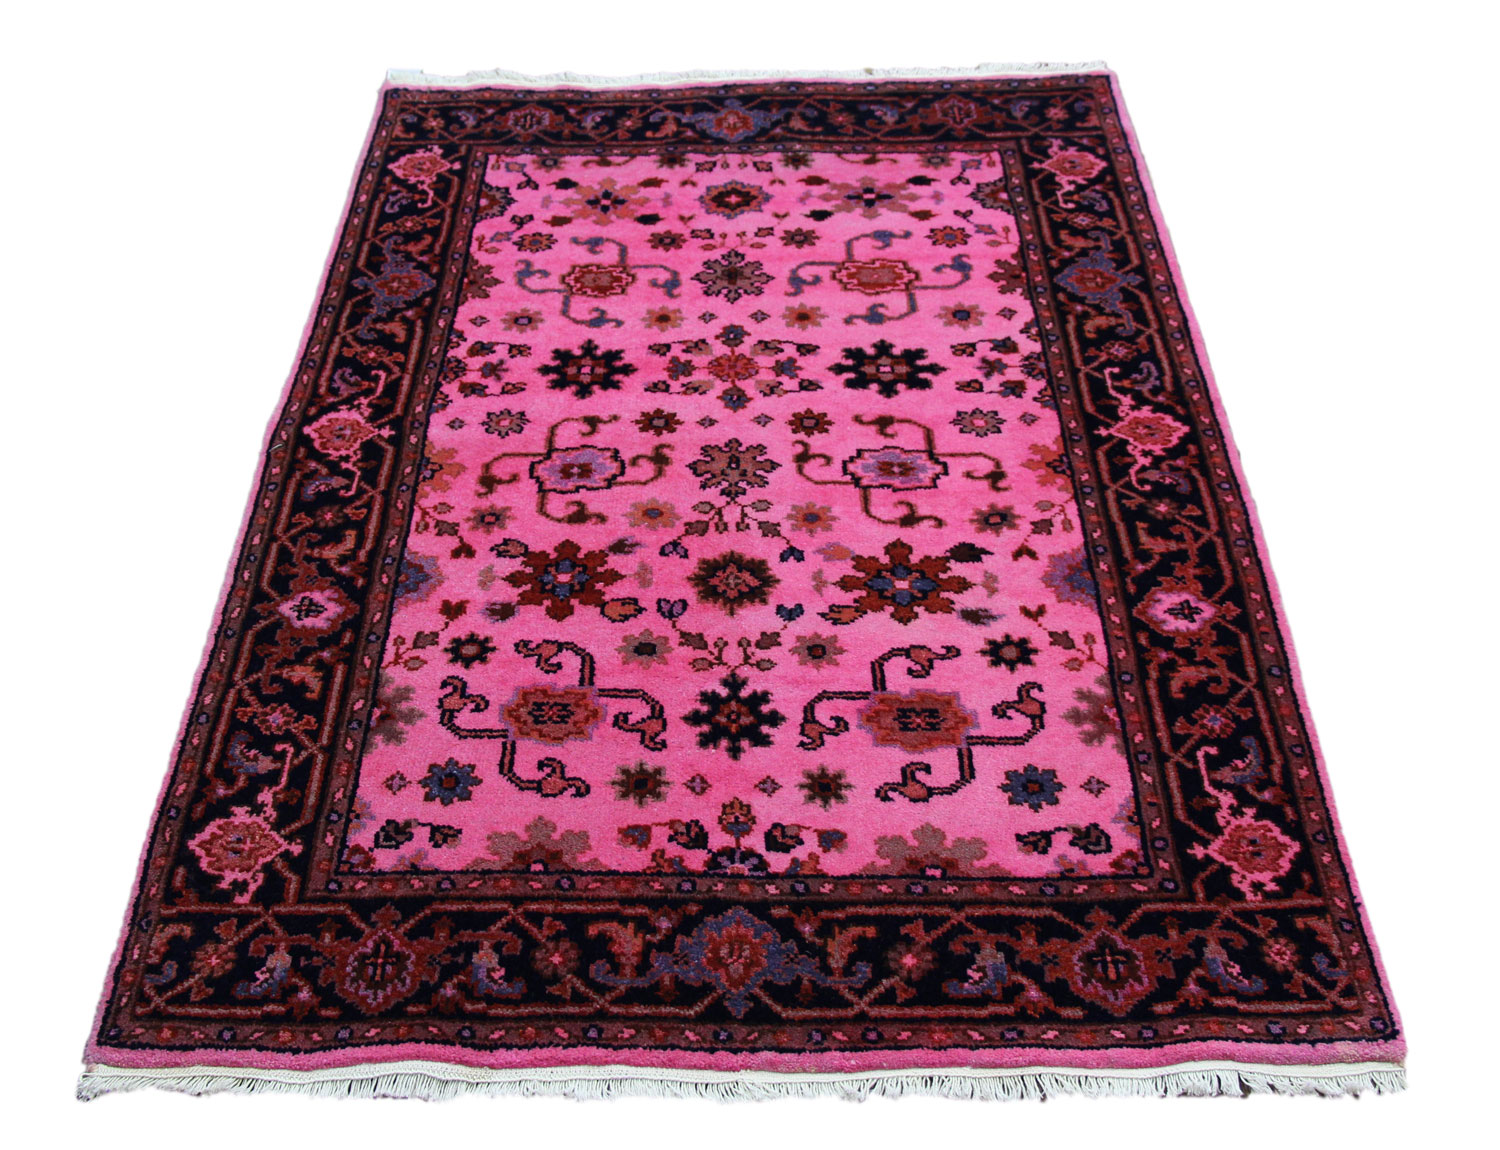 Handknotted Wool Rug